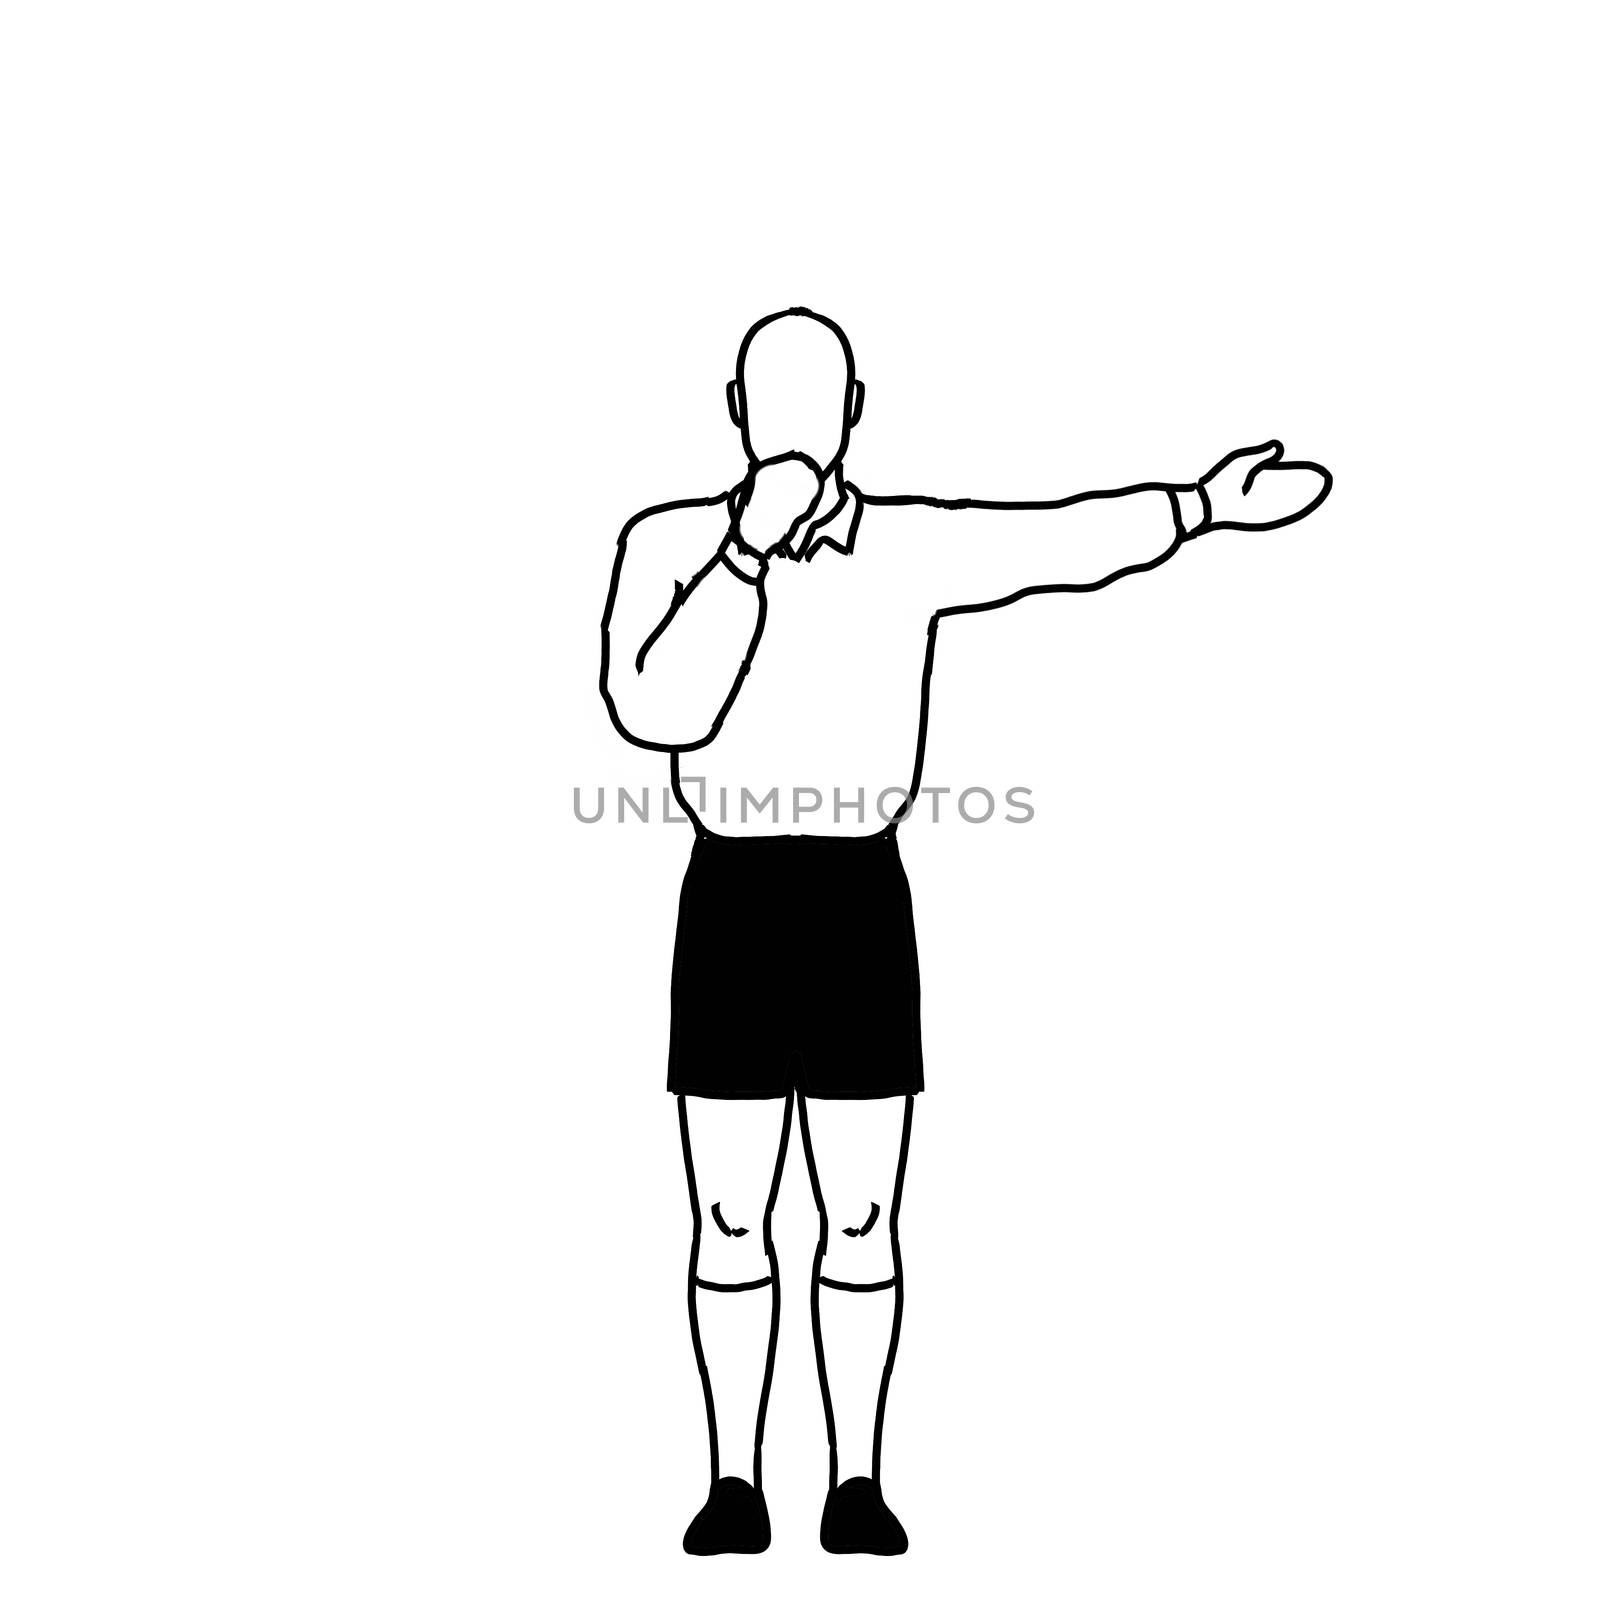 Rugby Referee penalty Direct Free Kick Signal Drawing Retro by patrimonio